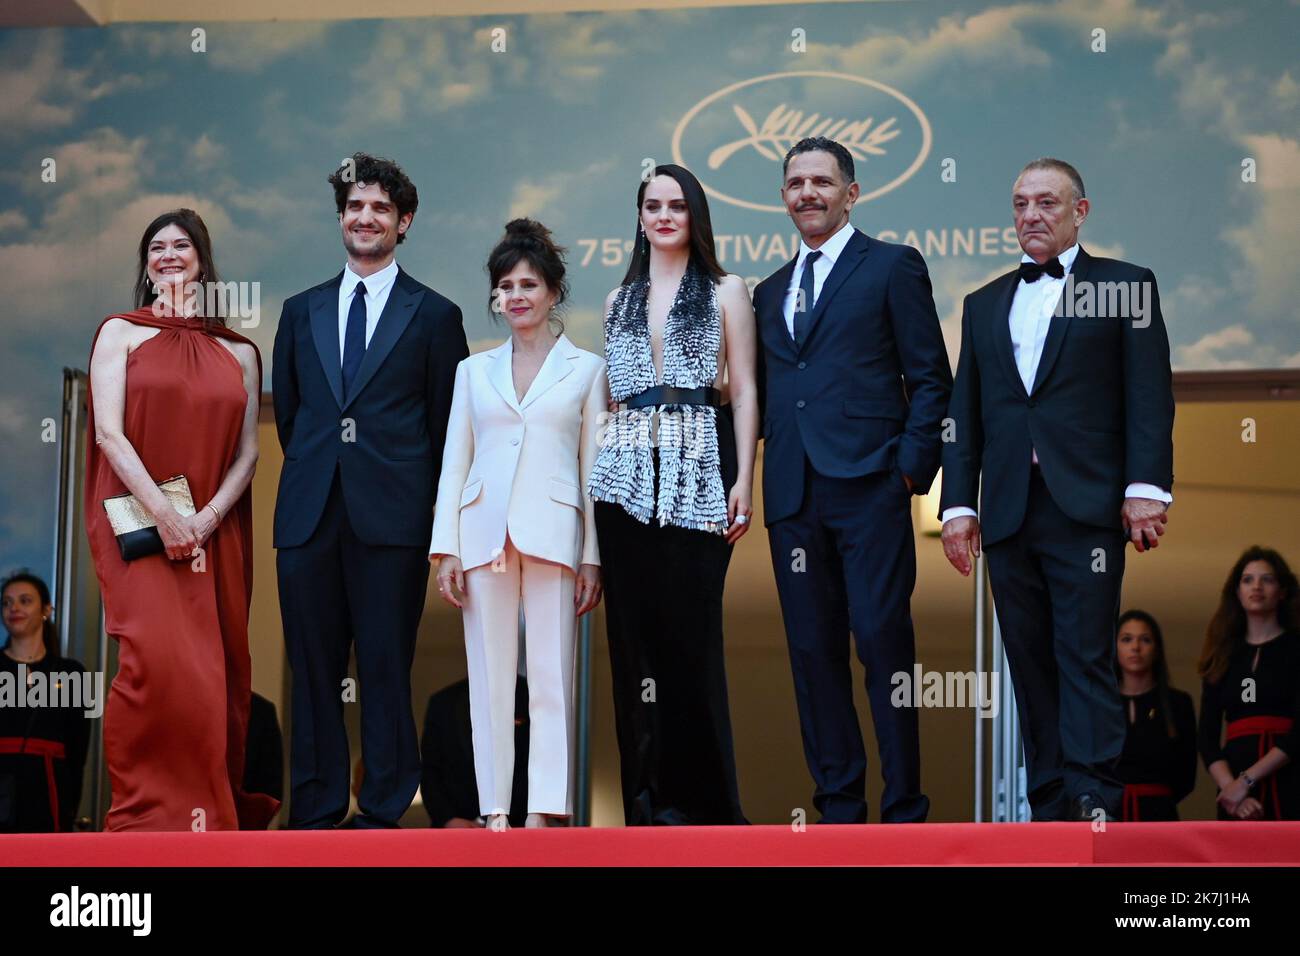 ©franck castel/MAXPPP - 20220005 75th Anniversary Celebration Screening Of The Innocent L'Innocent Red Carpet - The 75th Annual Cannes Film Festival Guest, Anouk Grinberg, Louis Garrel, Roschdy Zem , Noemie Merlant CANNES, FRANCE - MAY 24 Stock Photo